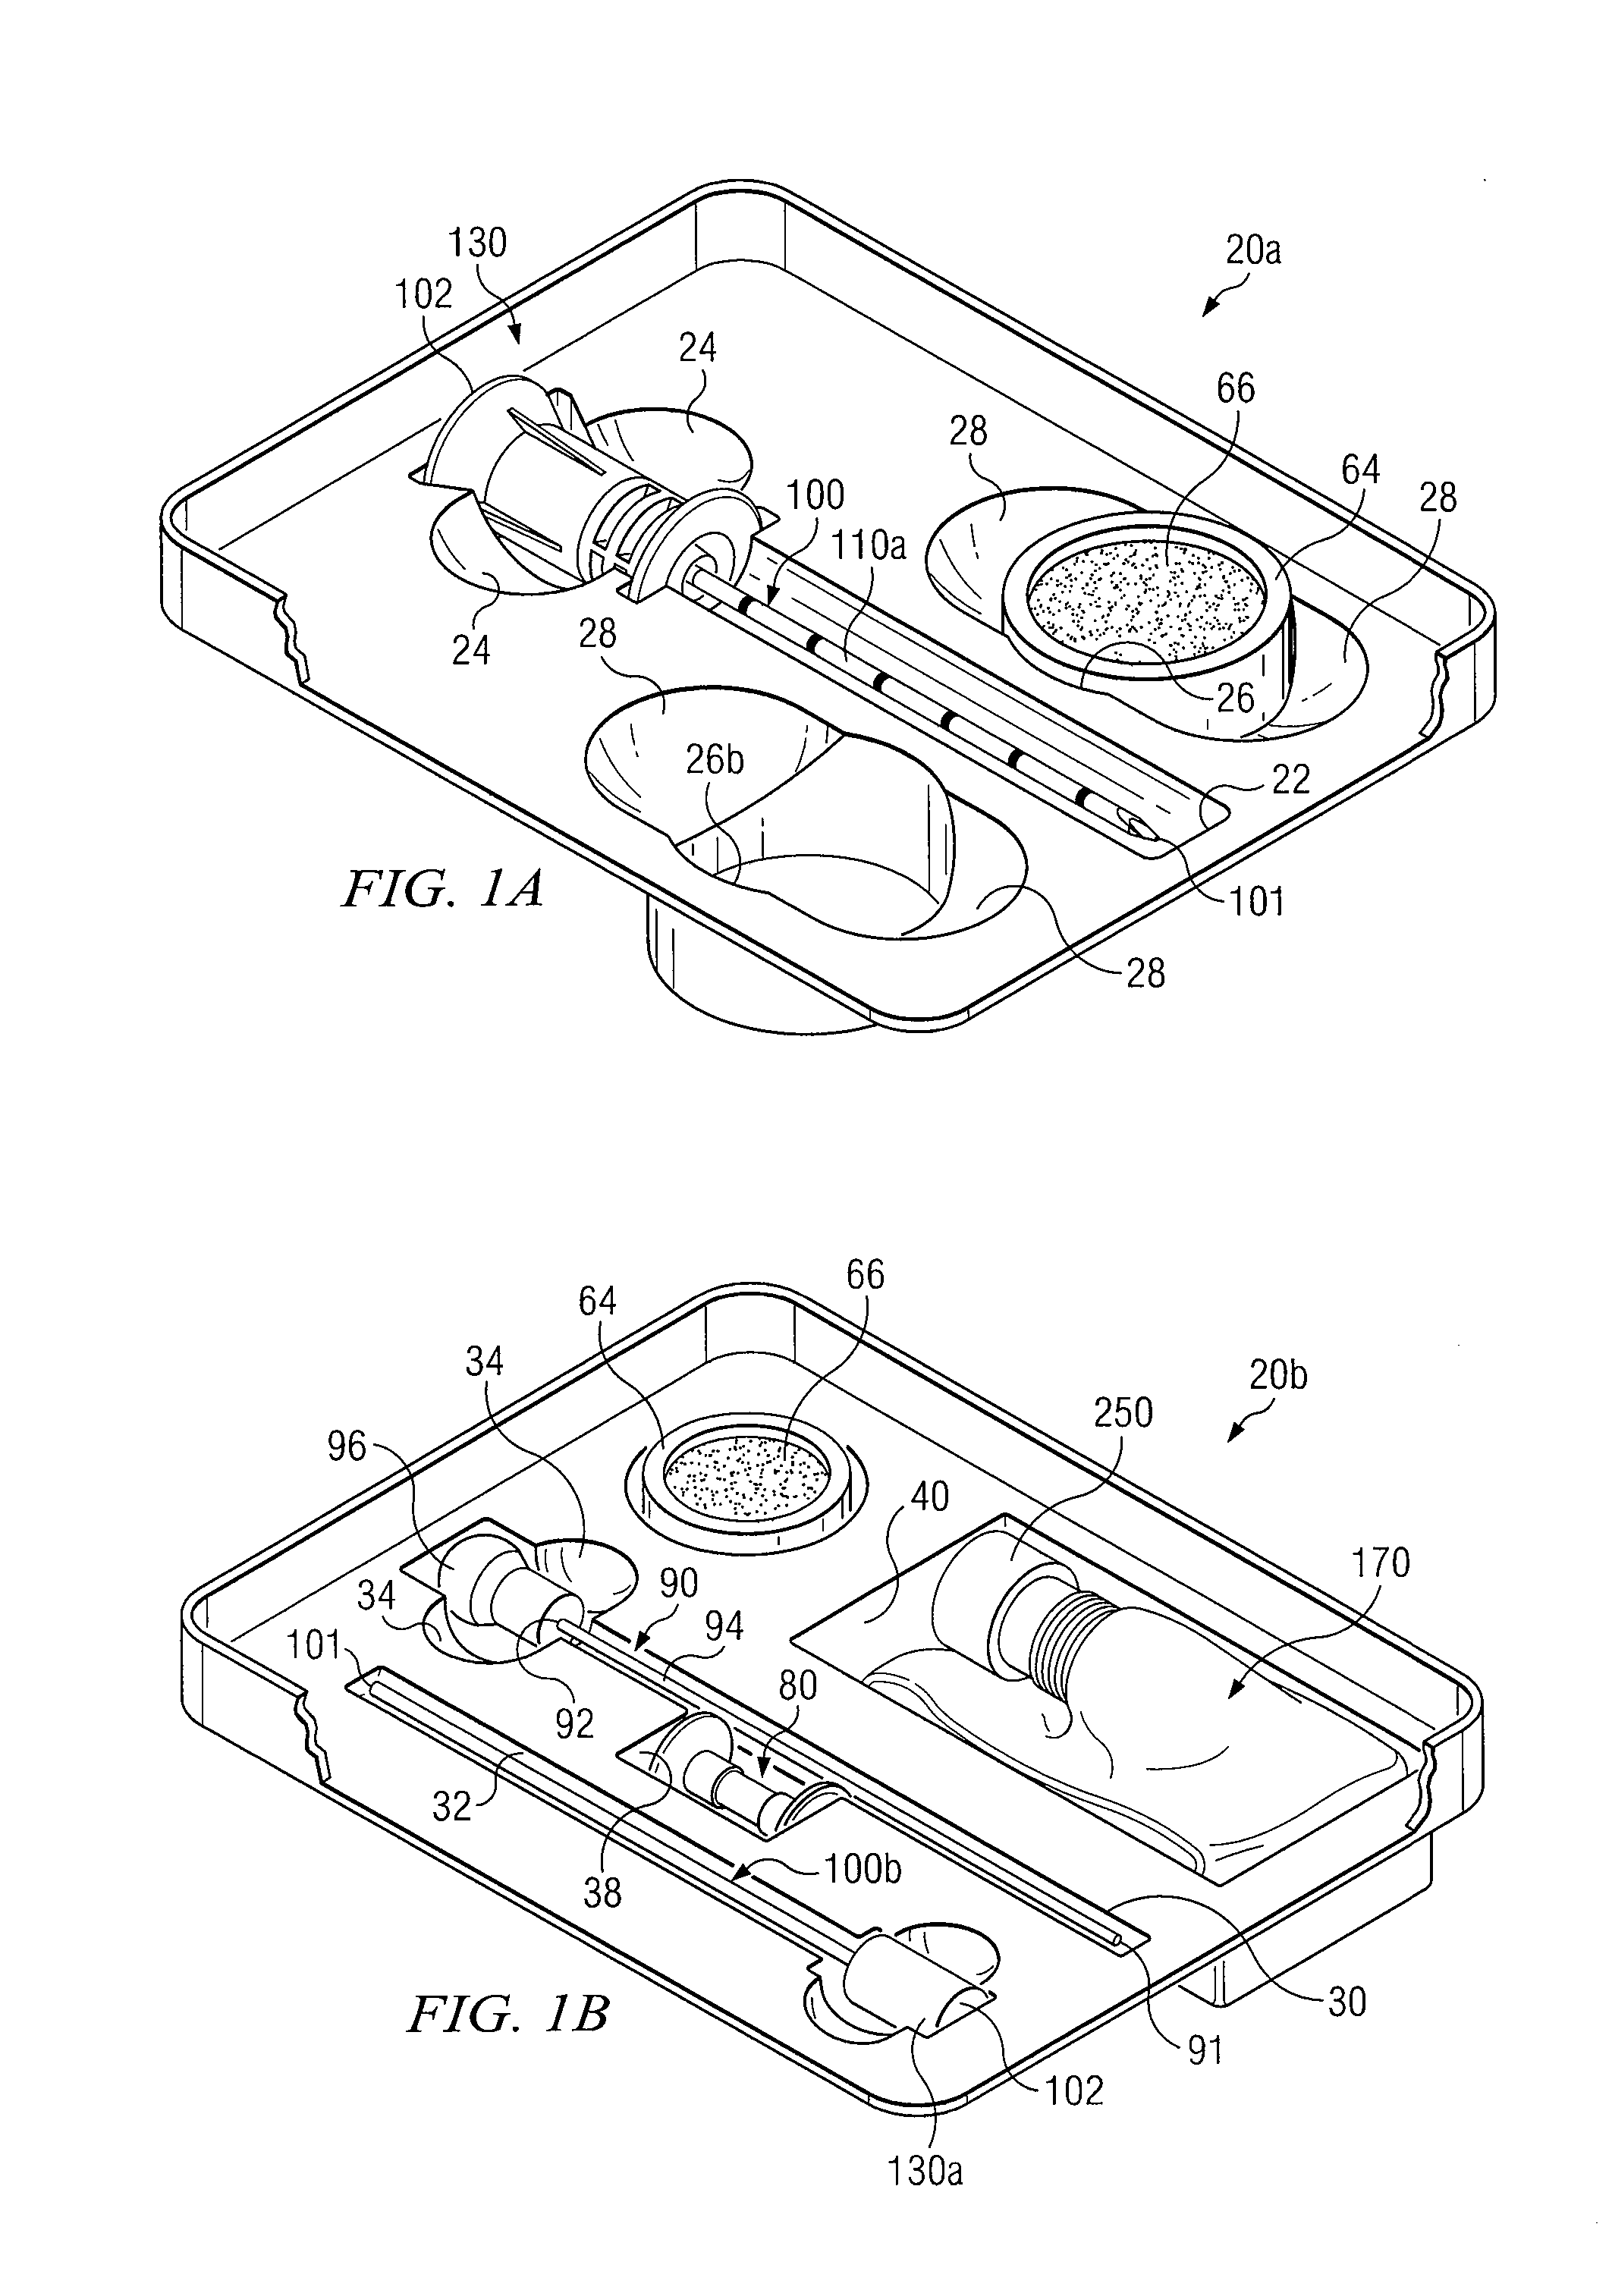 Apparatus and Methods for Biopsy and Aspiration of Bone Marrow